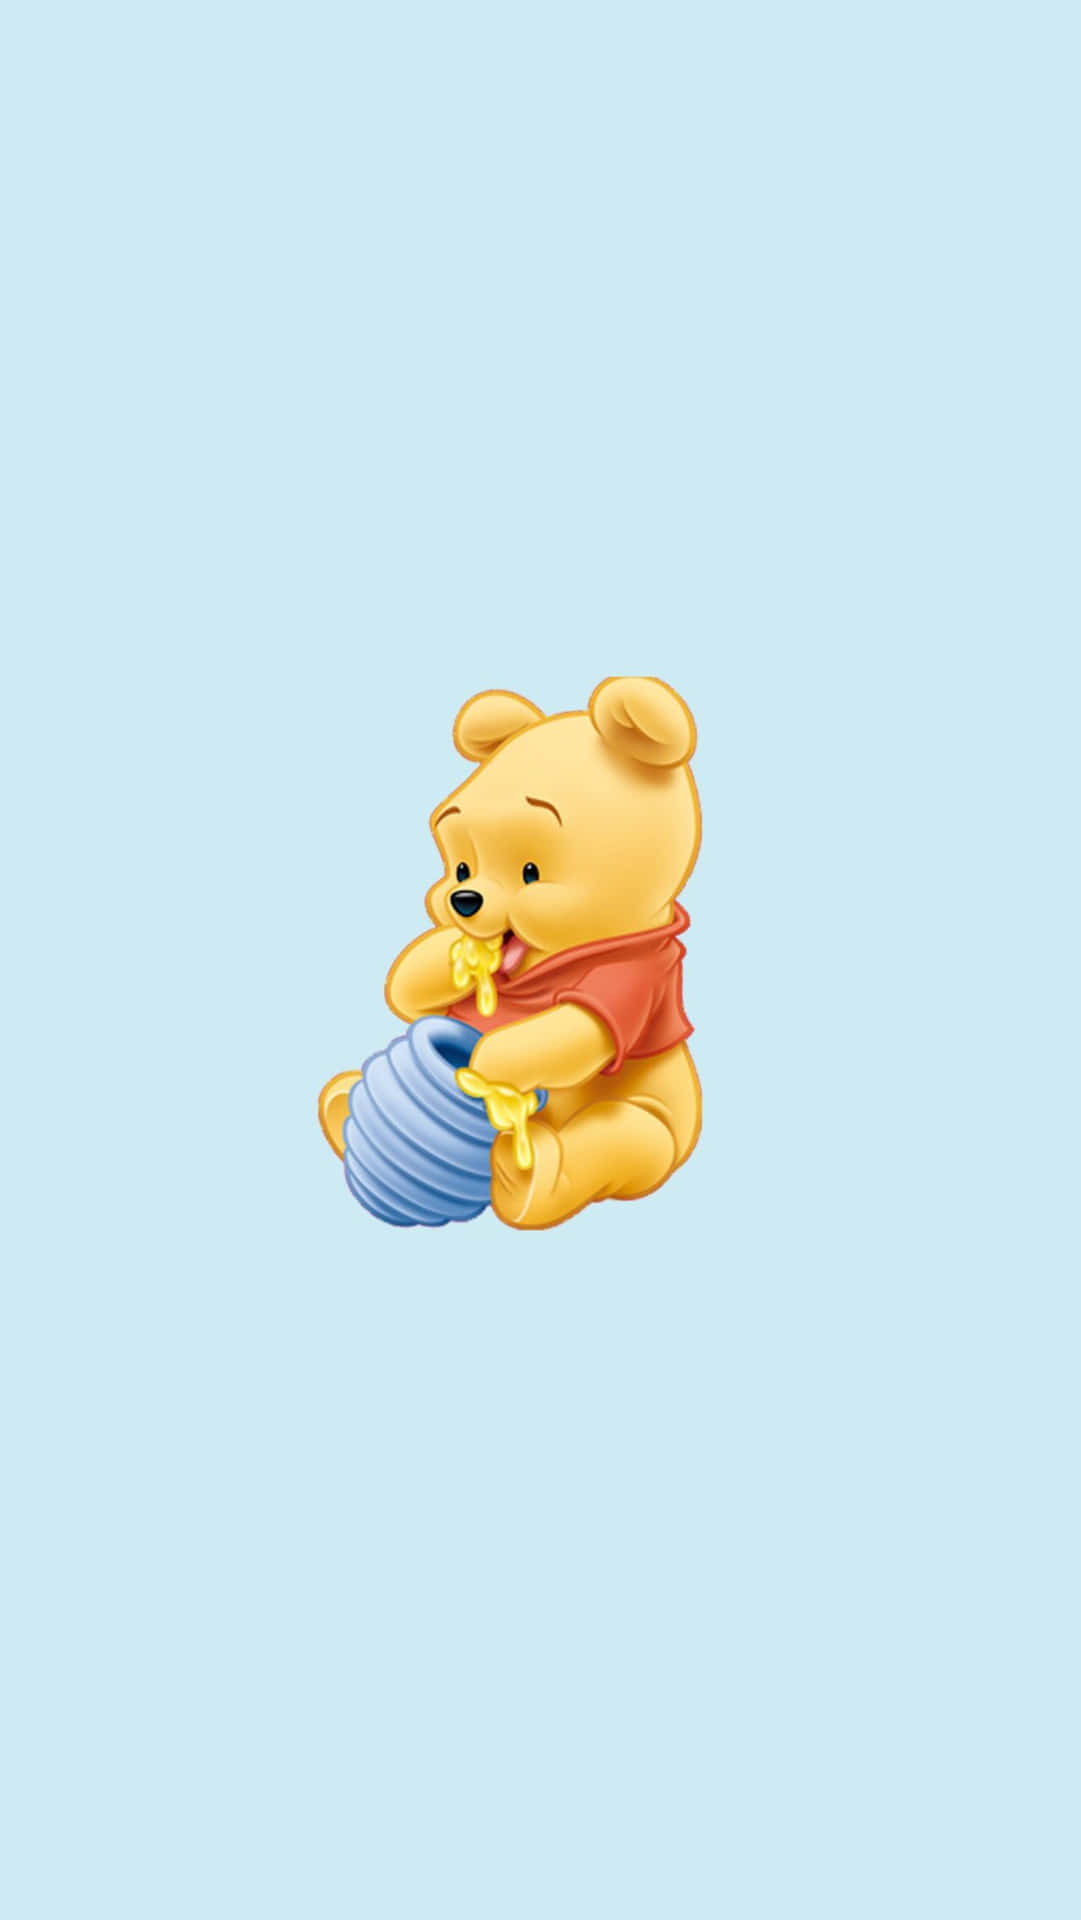 HD wallpaper Winnie the Pooh and friends illustration TV Show multi  colored  Wallpaper Flare